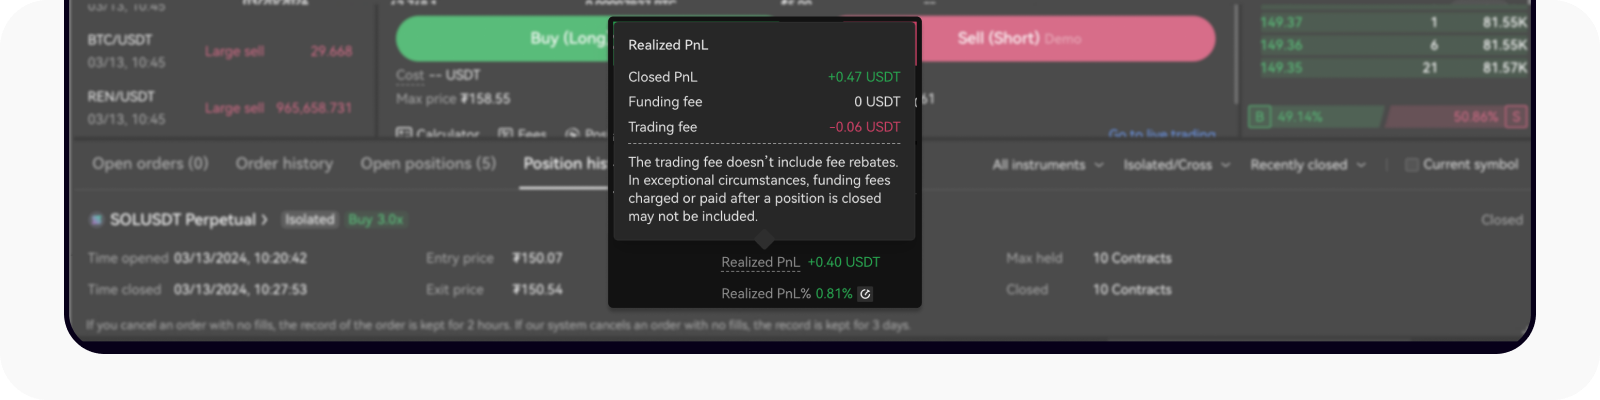 CT-web-futures and options trading-realized PnL details